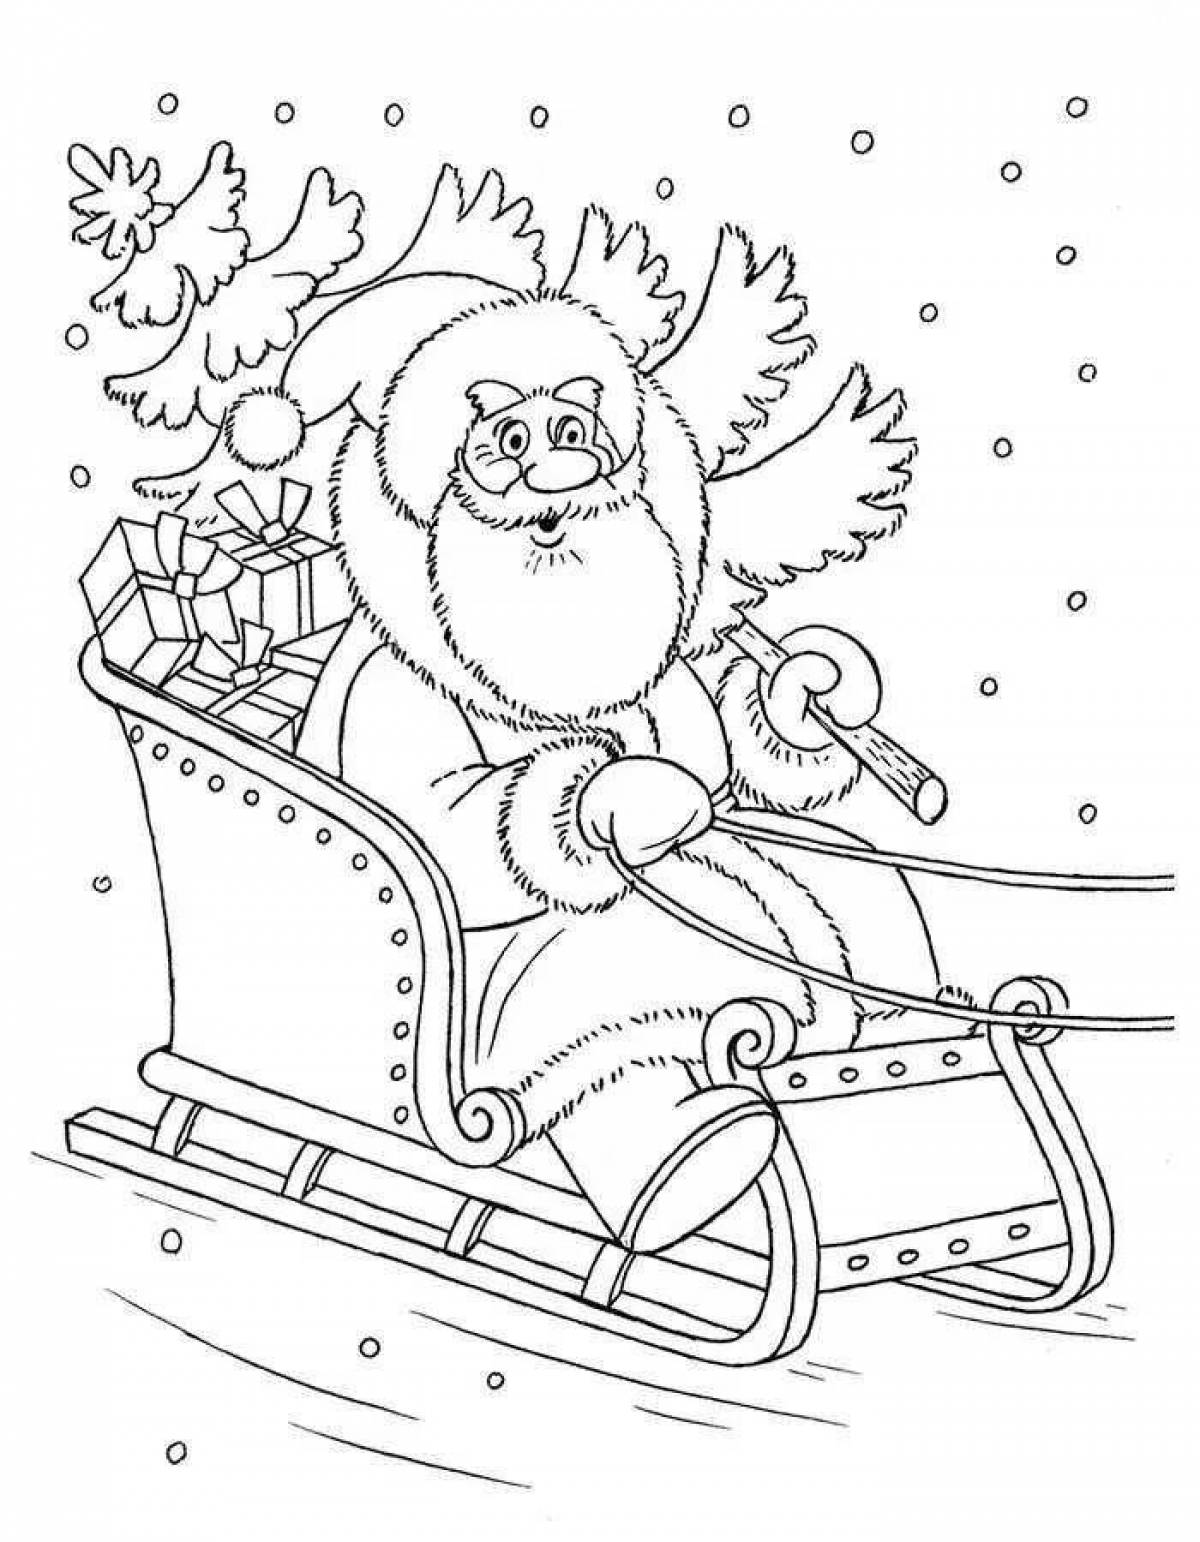 Coloring page quirky santa claus on sleigh